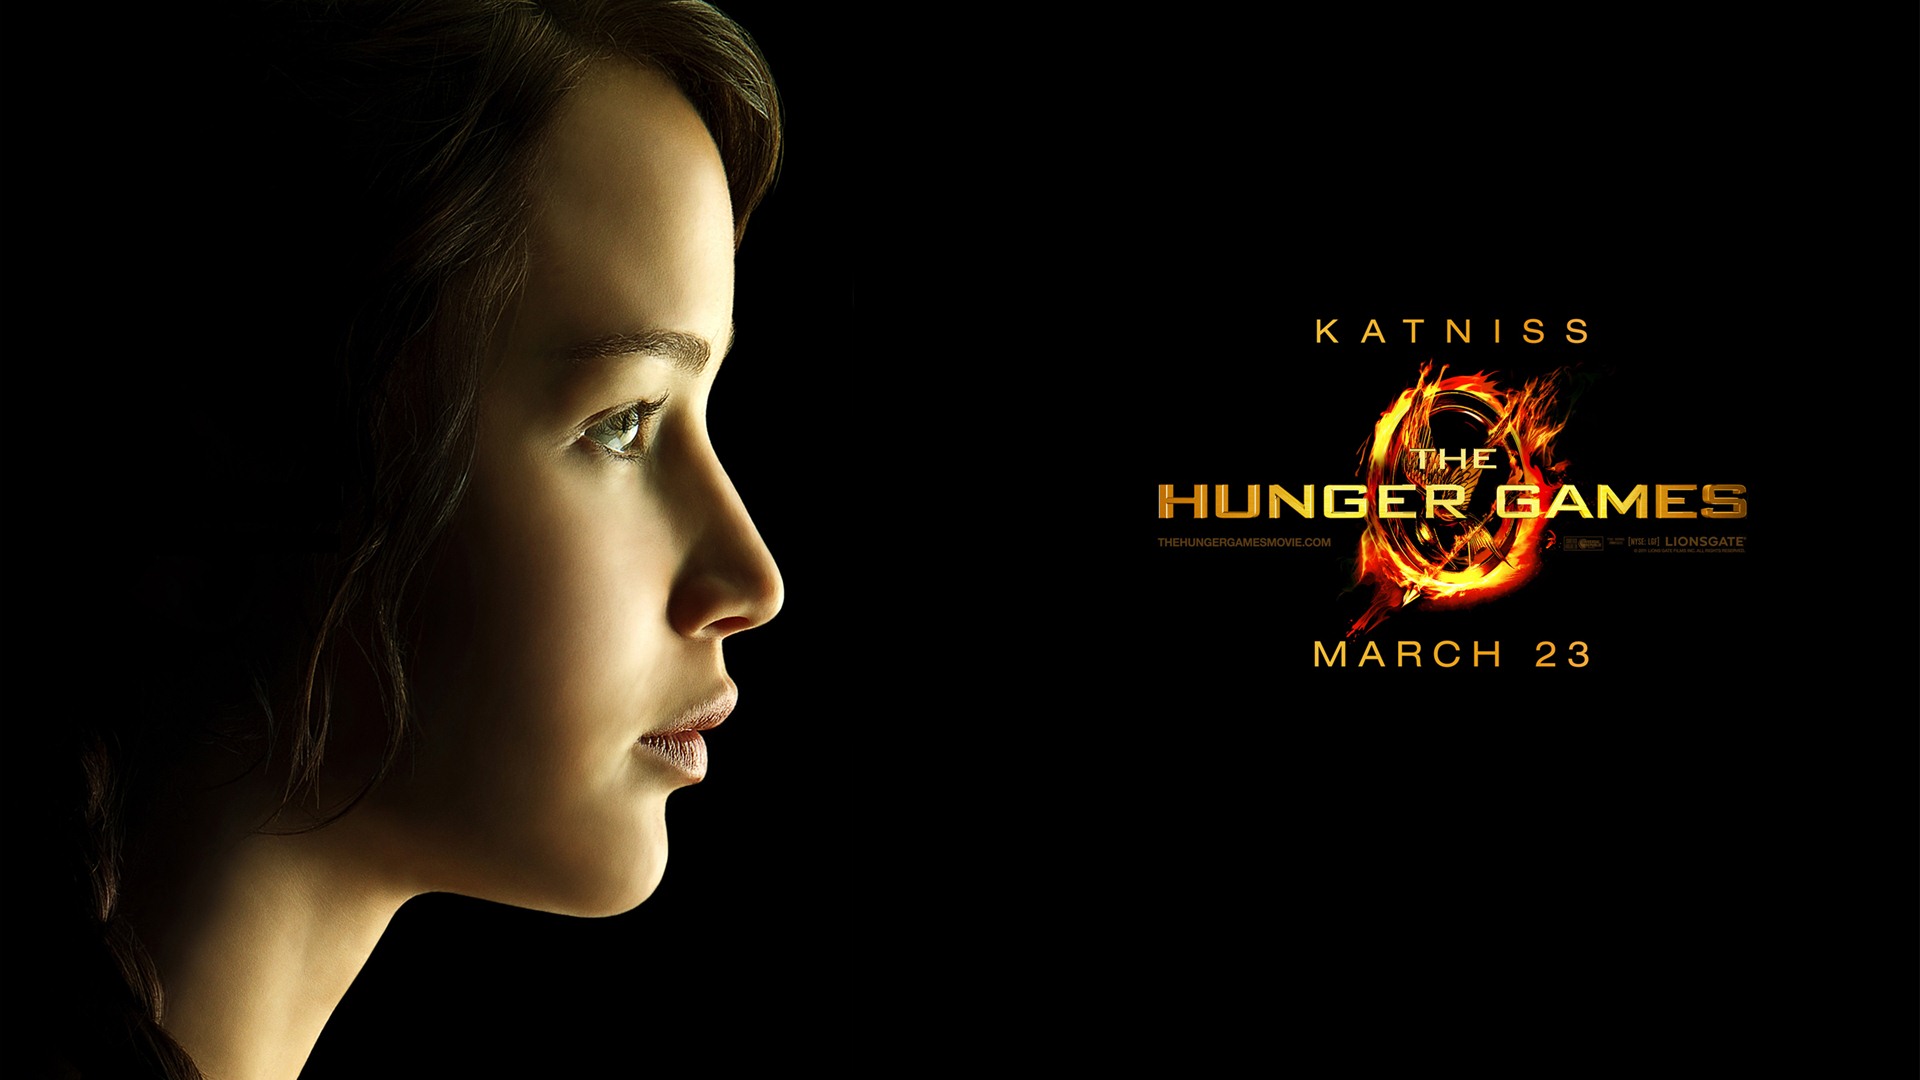 The Hunger Games HD wallpapers #14 - 1920x1080